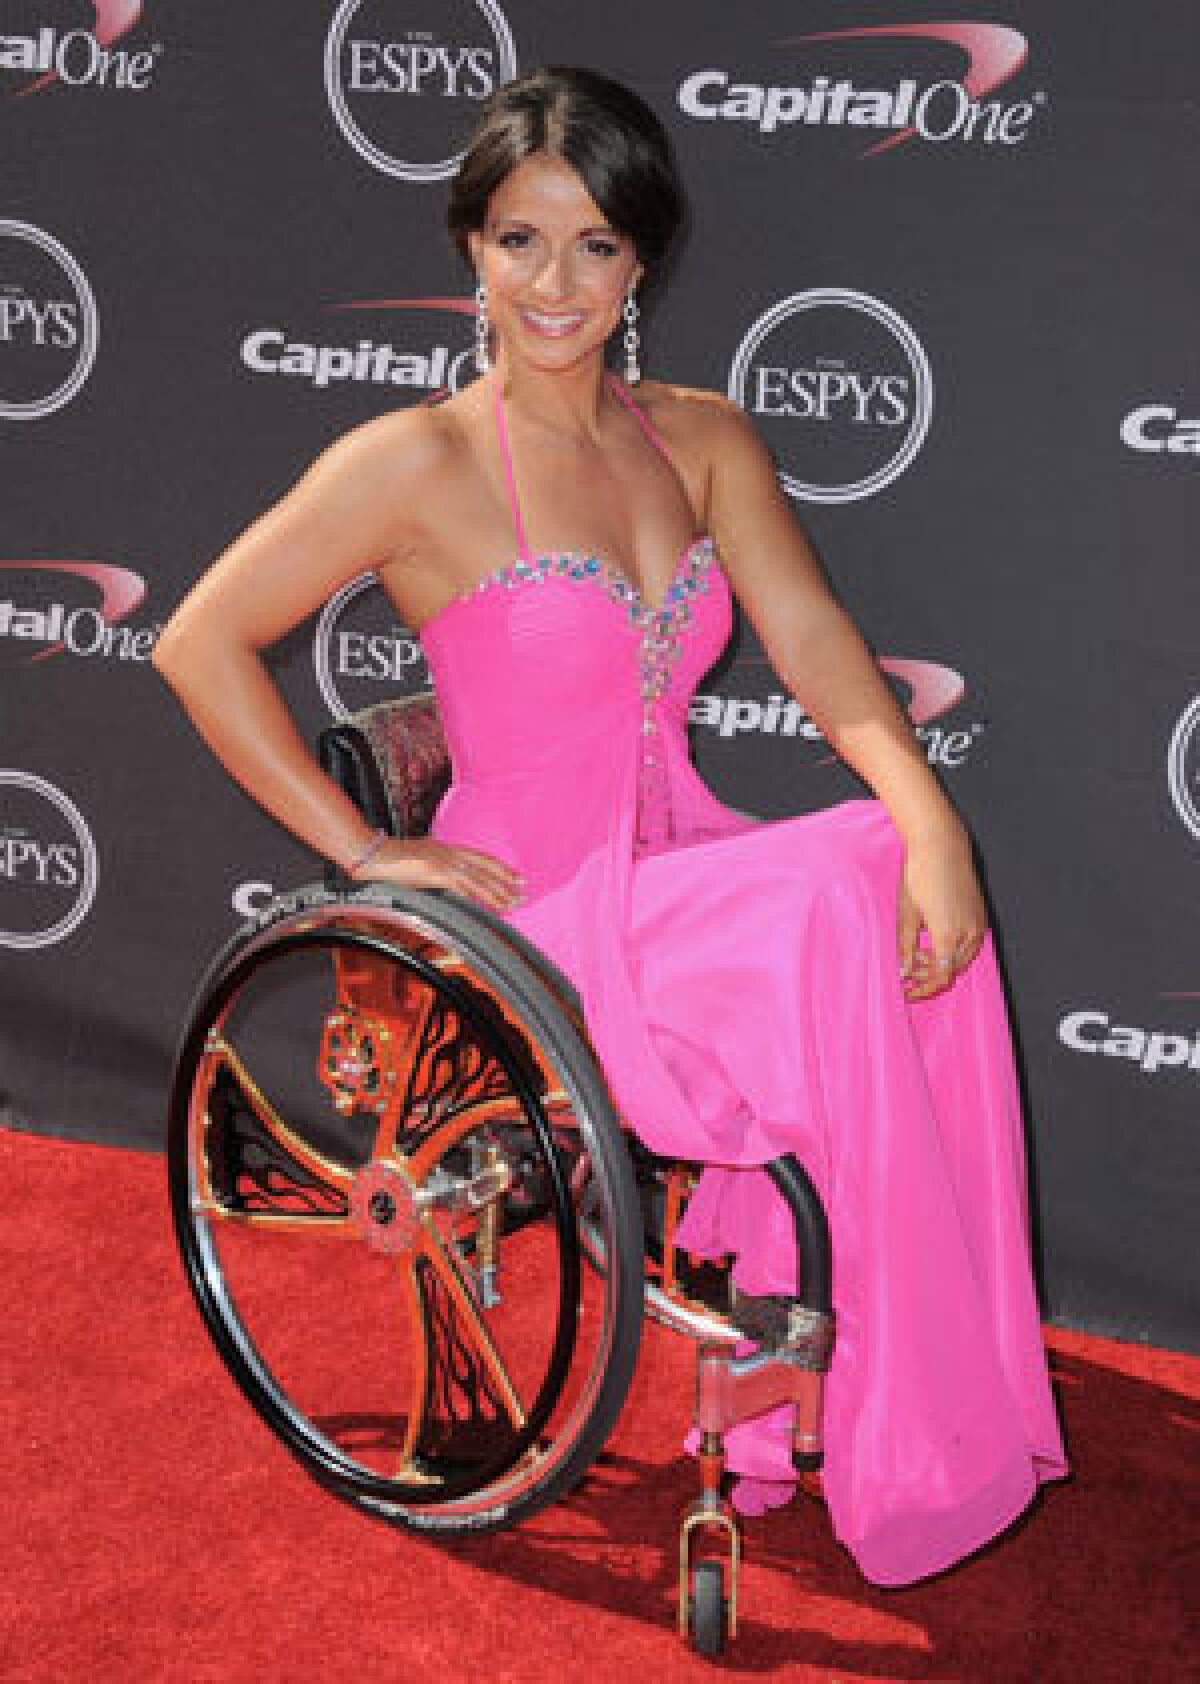 Victoria Arlen, shown at the ESPY awards earlier this year, has been banned from competing at the Paralympic world championships after the paralysis in her legs was ruled not permanent.